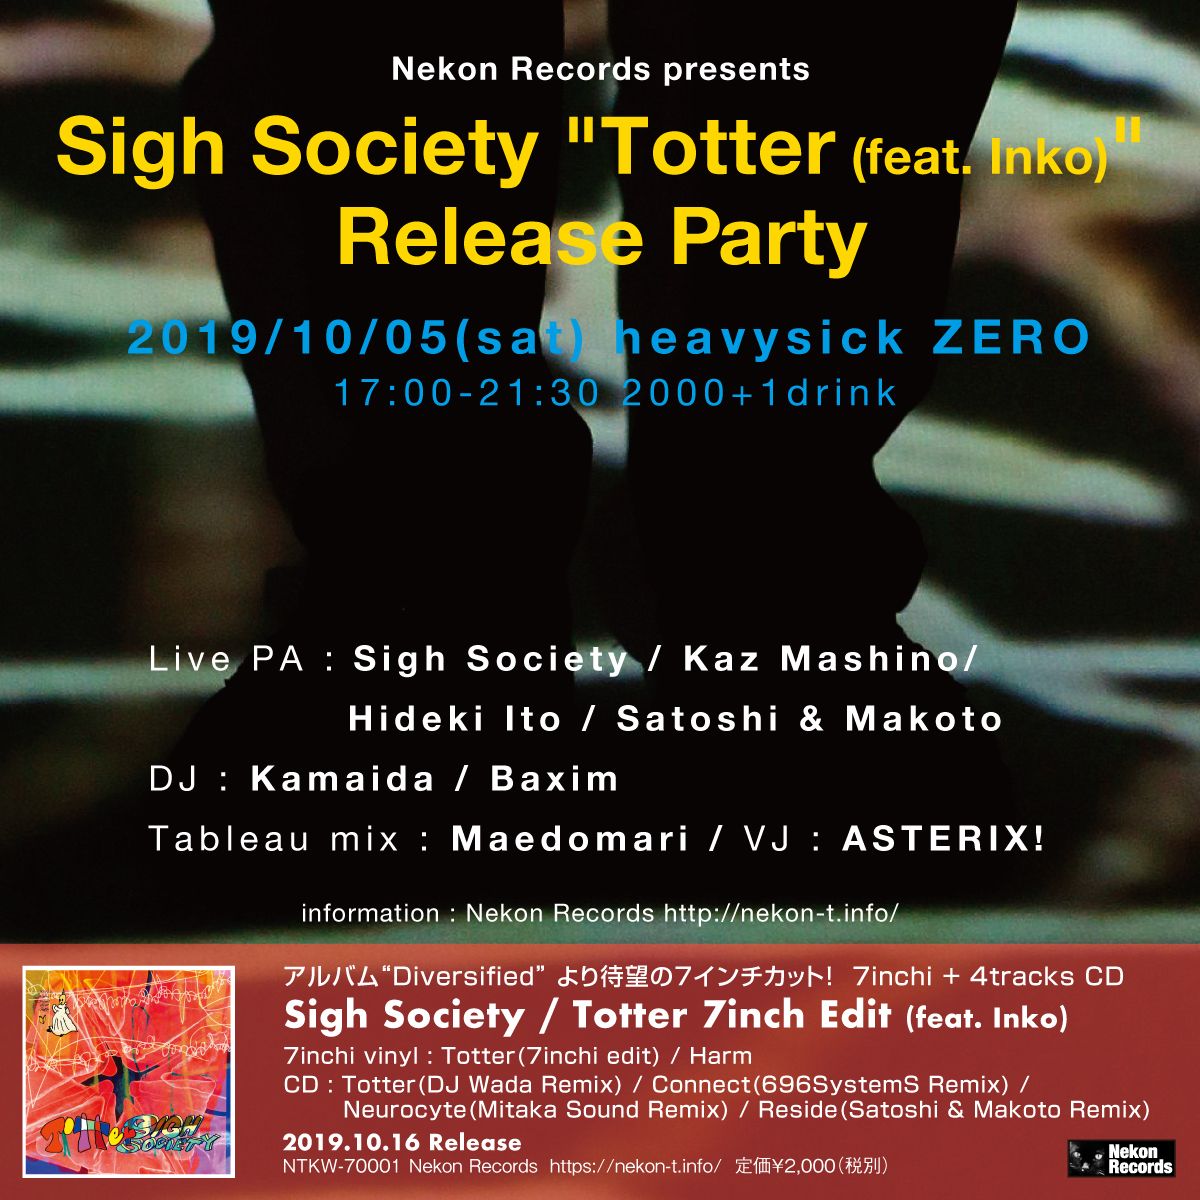 Sigh Society "Totter" Release Party